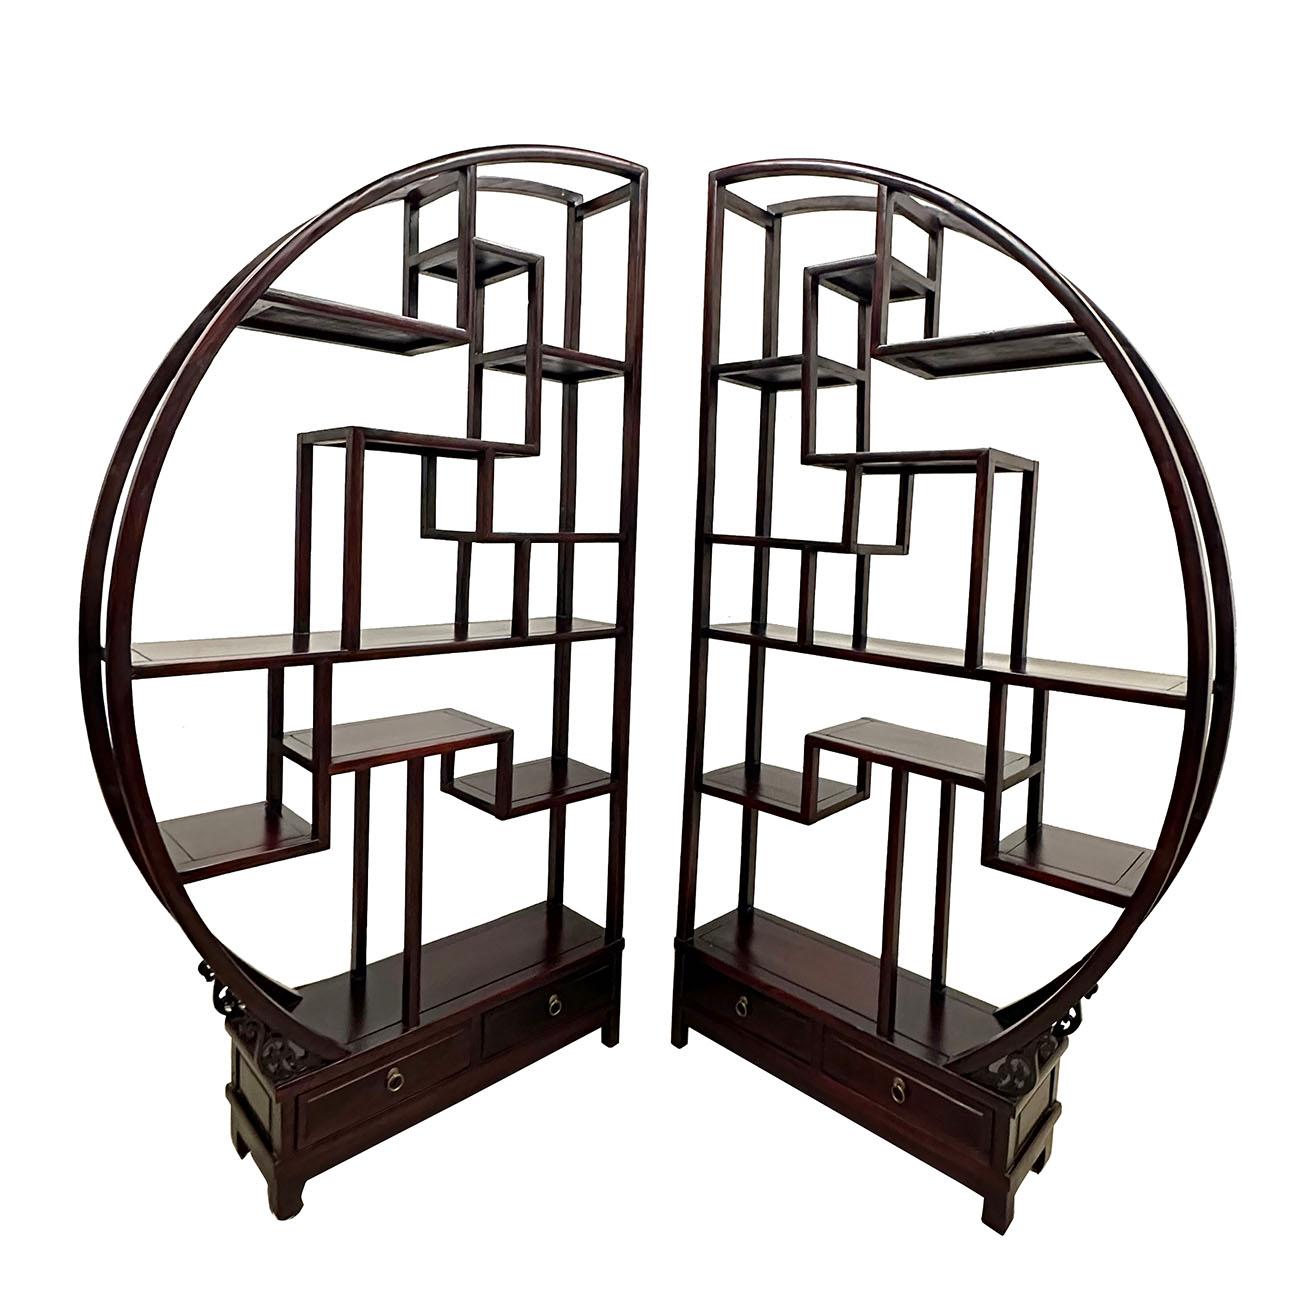 This unique piece is a classical Chinese art deco display/room divider in the original condition, all hand carved and free standing shelving unite in dark mahogany finished.   It features plenty of irregular shapes shelf to display your treasures on